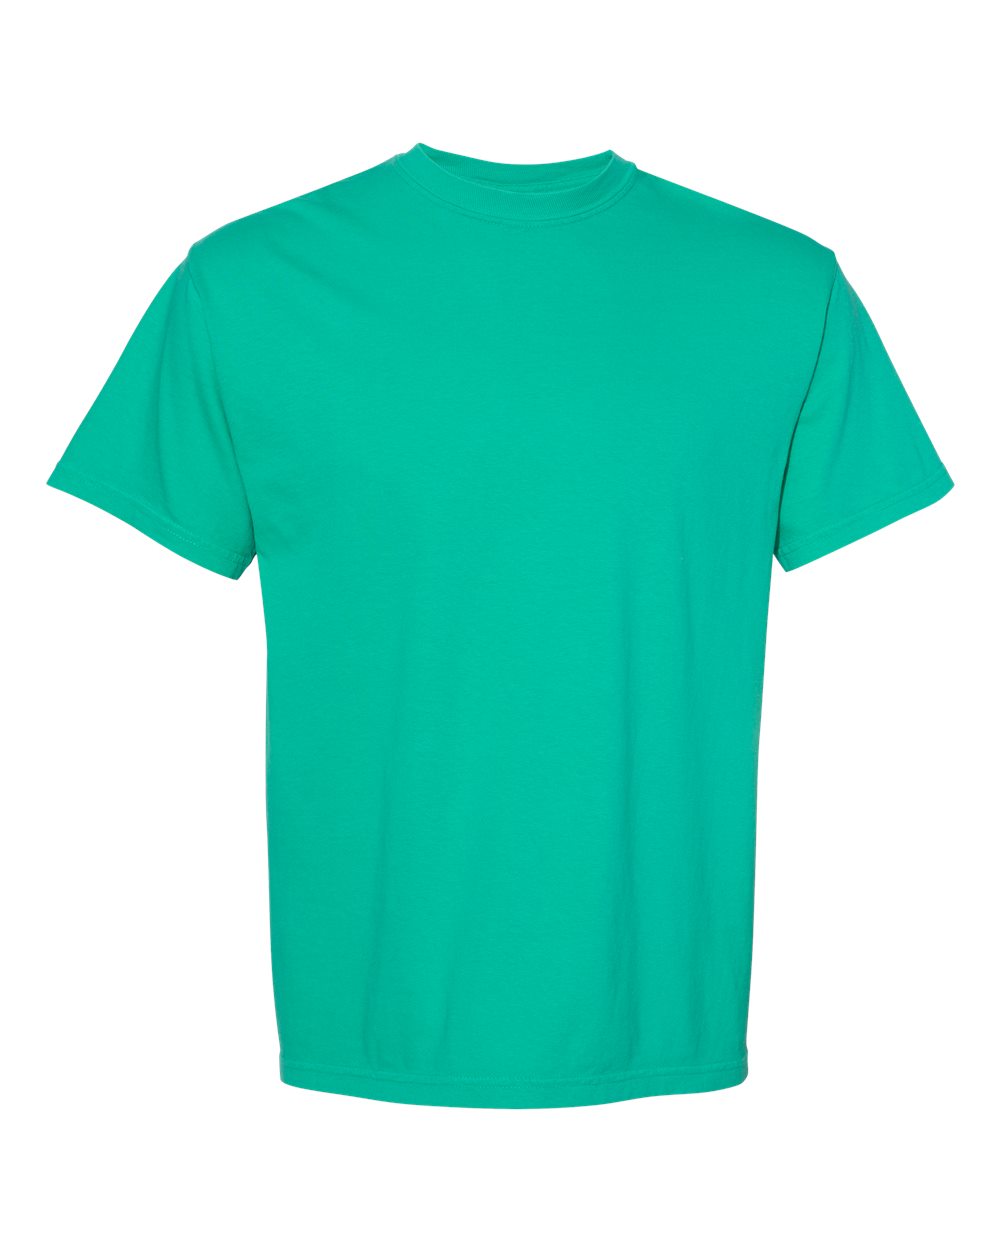 Comfort Colors Garment-Dyed Tee (1717) in Island Green